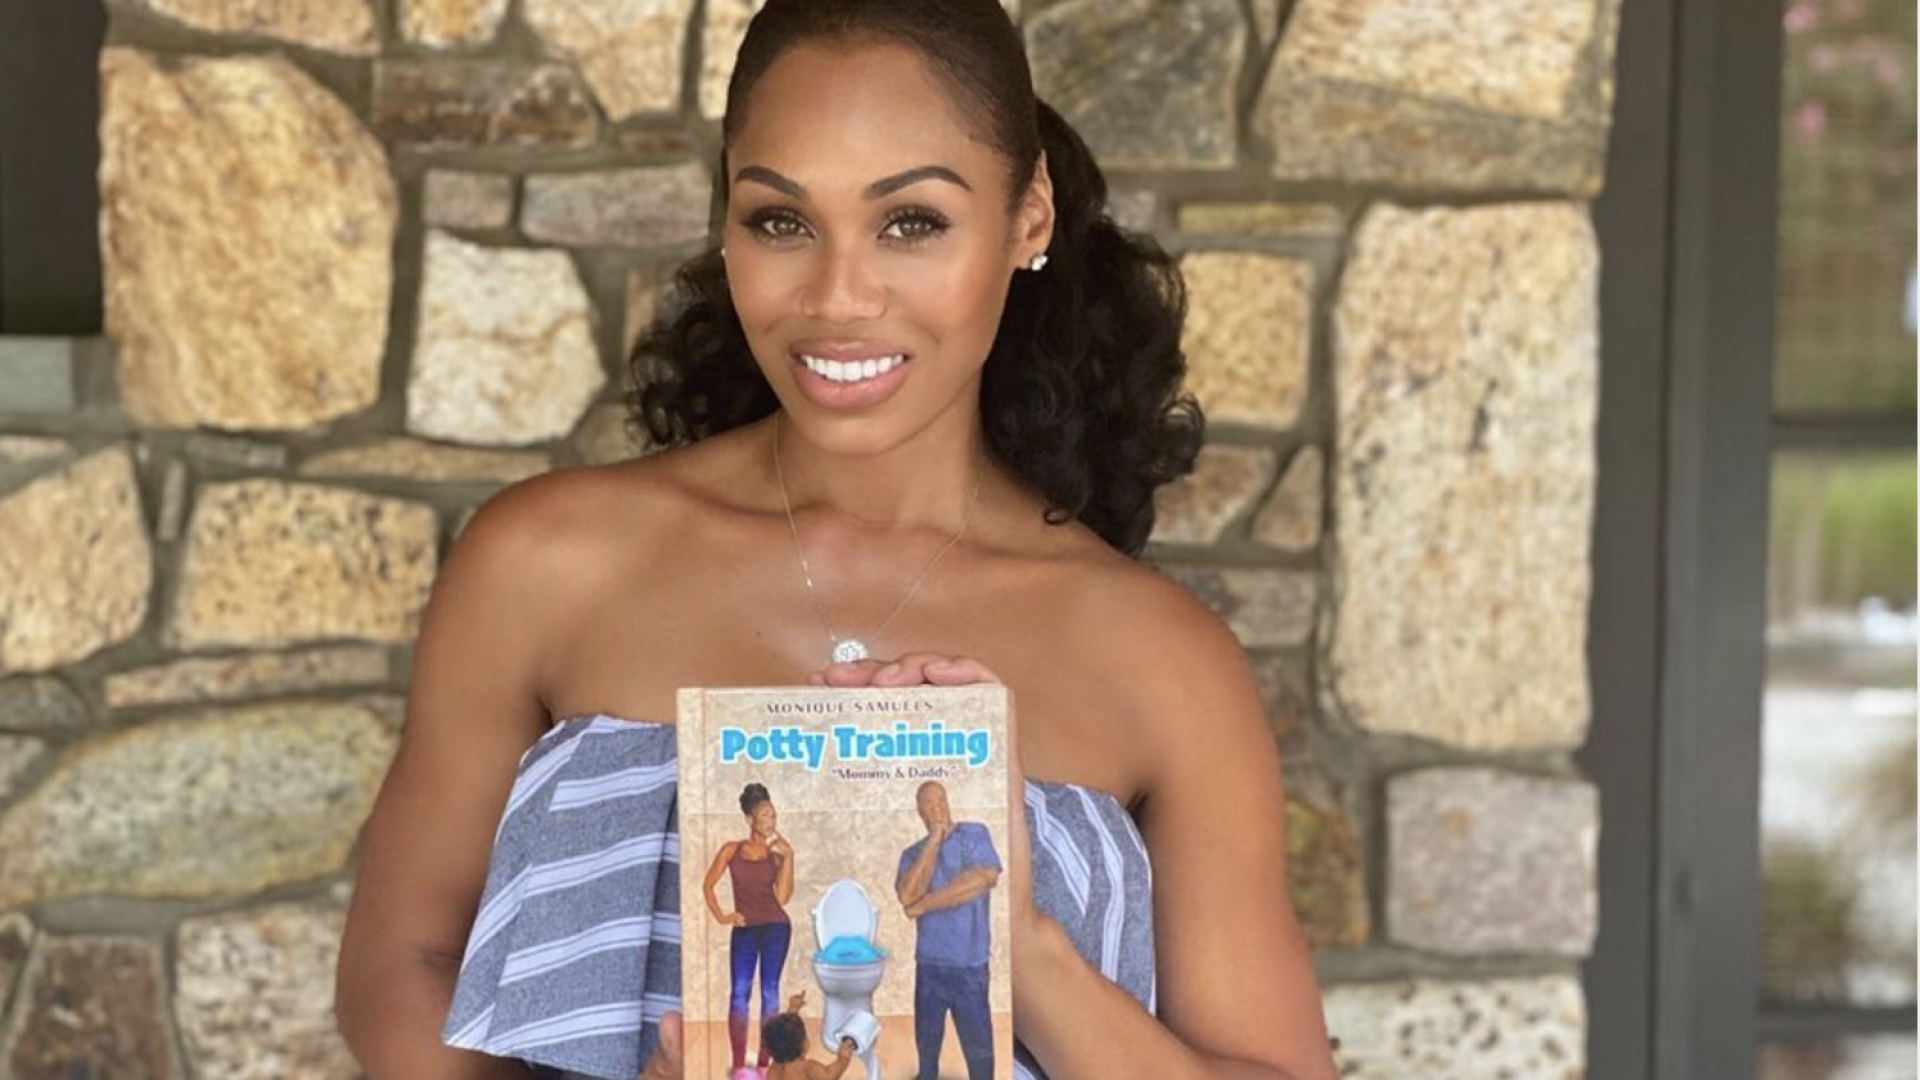 'Real Housewives Of Potomac' Star Monique Samuels Says Potty Training Should Start At 6 Months